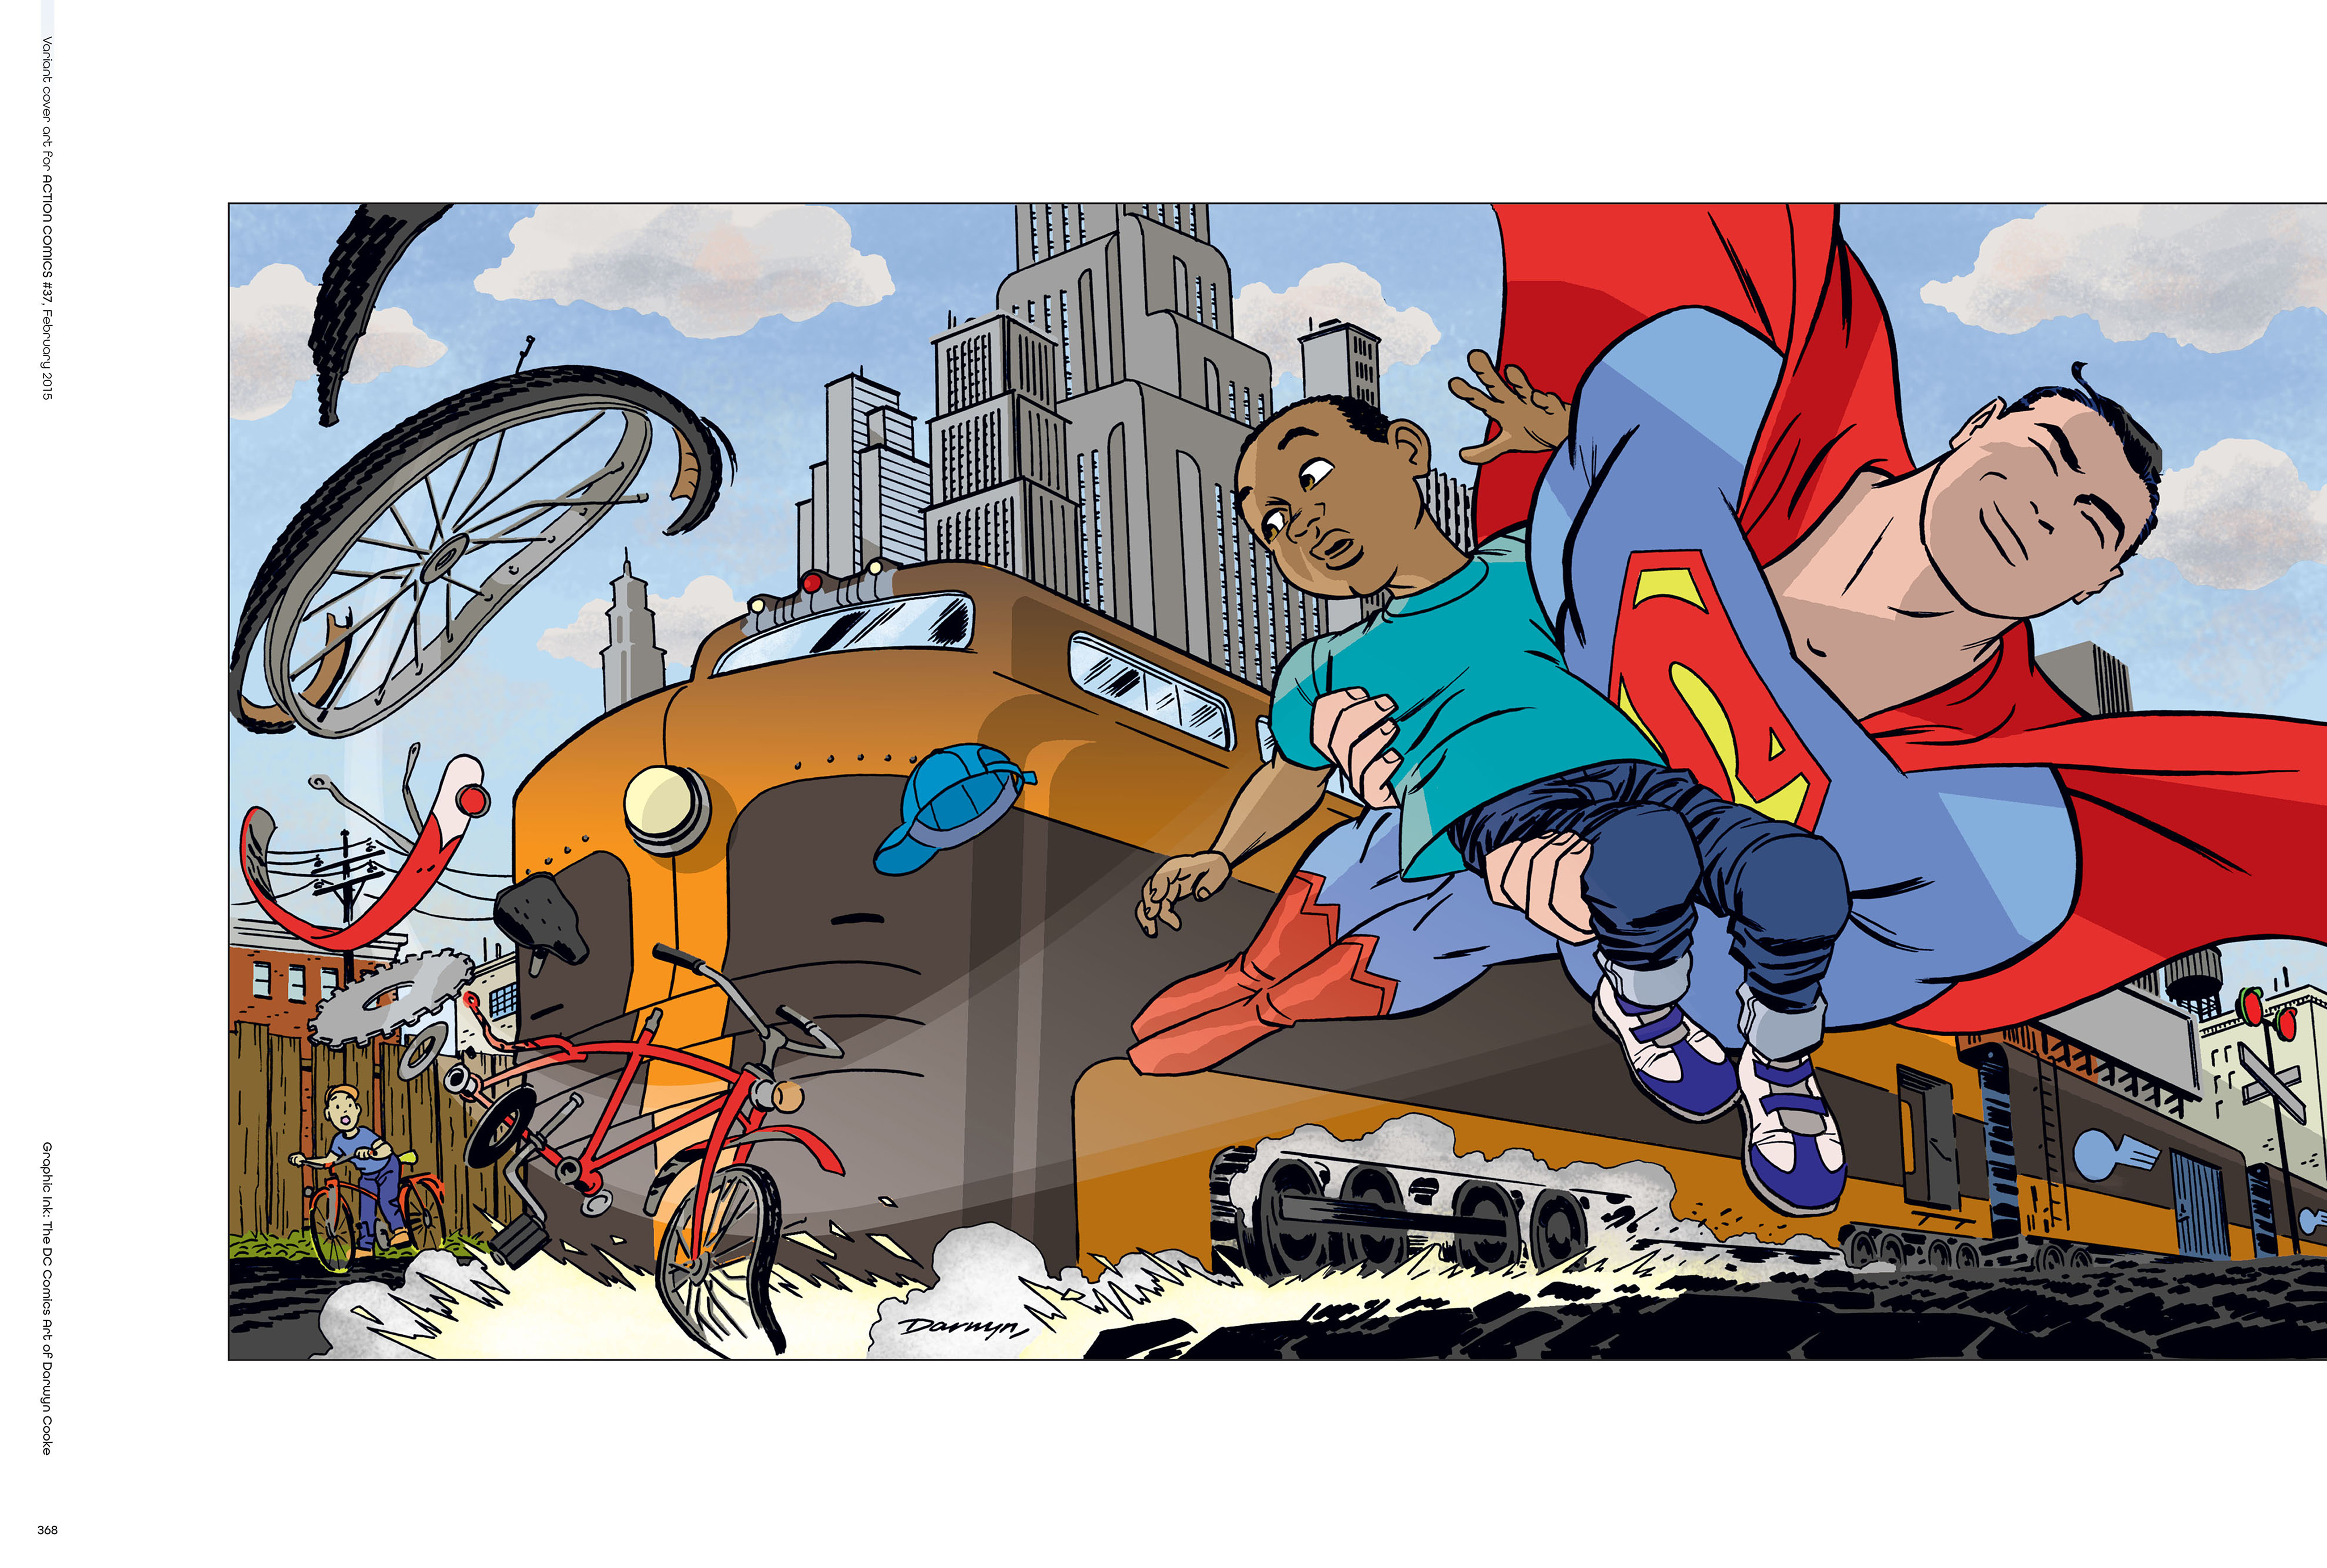 Action Comics Picture by Darwyn Cooke